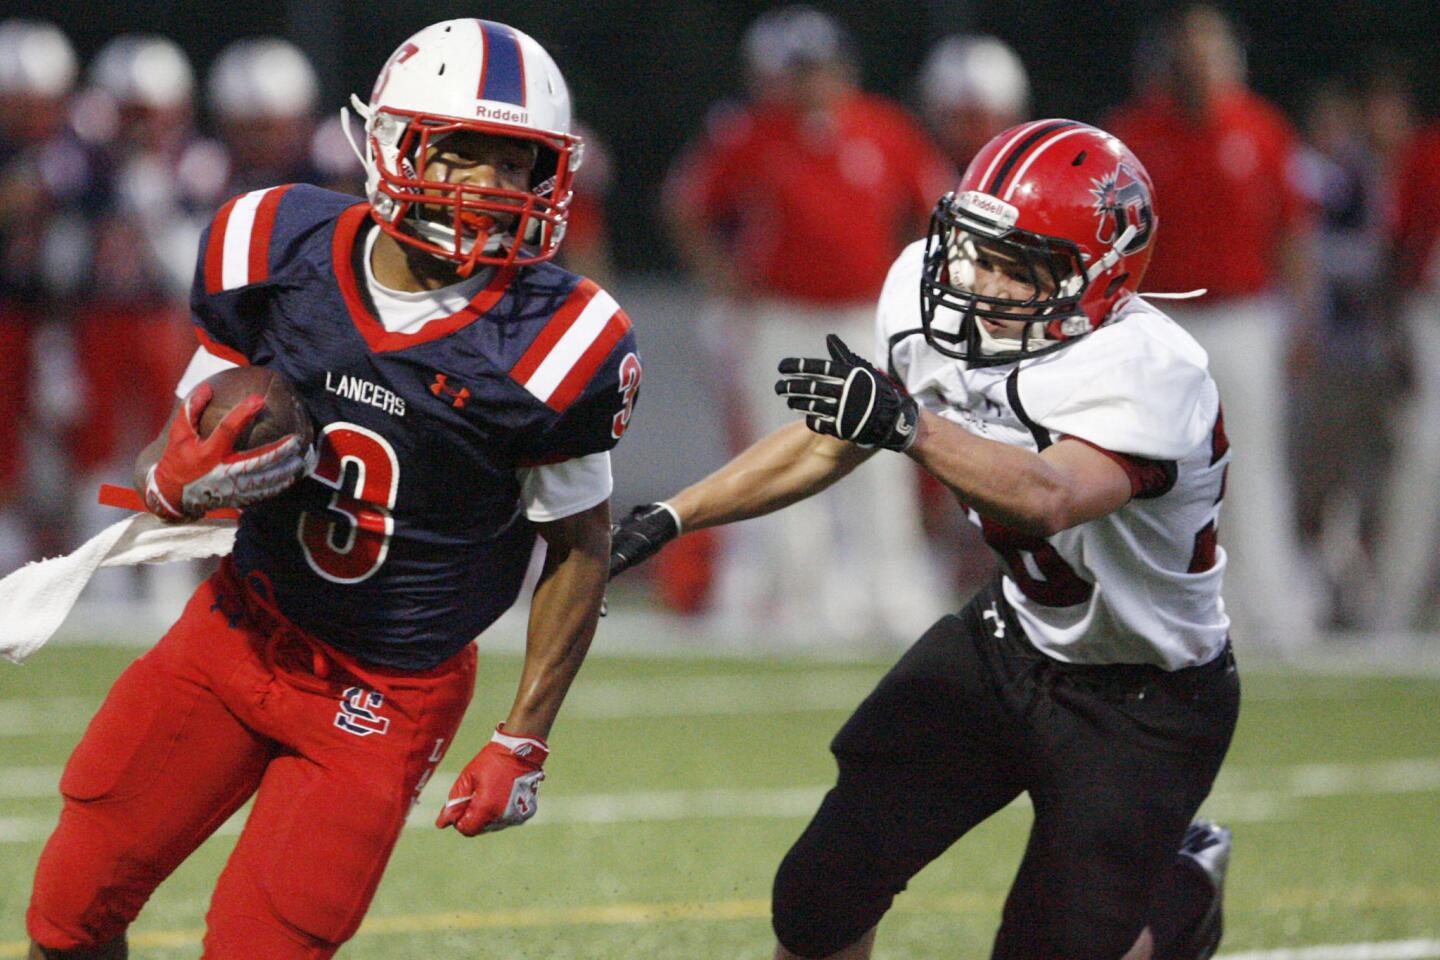 La Salle's Amir Evans, left, runs with the ball while Glendale's Sam Peplow tries to tackle Evans during a game at La Salle High School in Pasadena on Friday, on August 31, 2012.